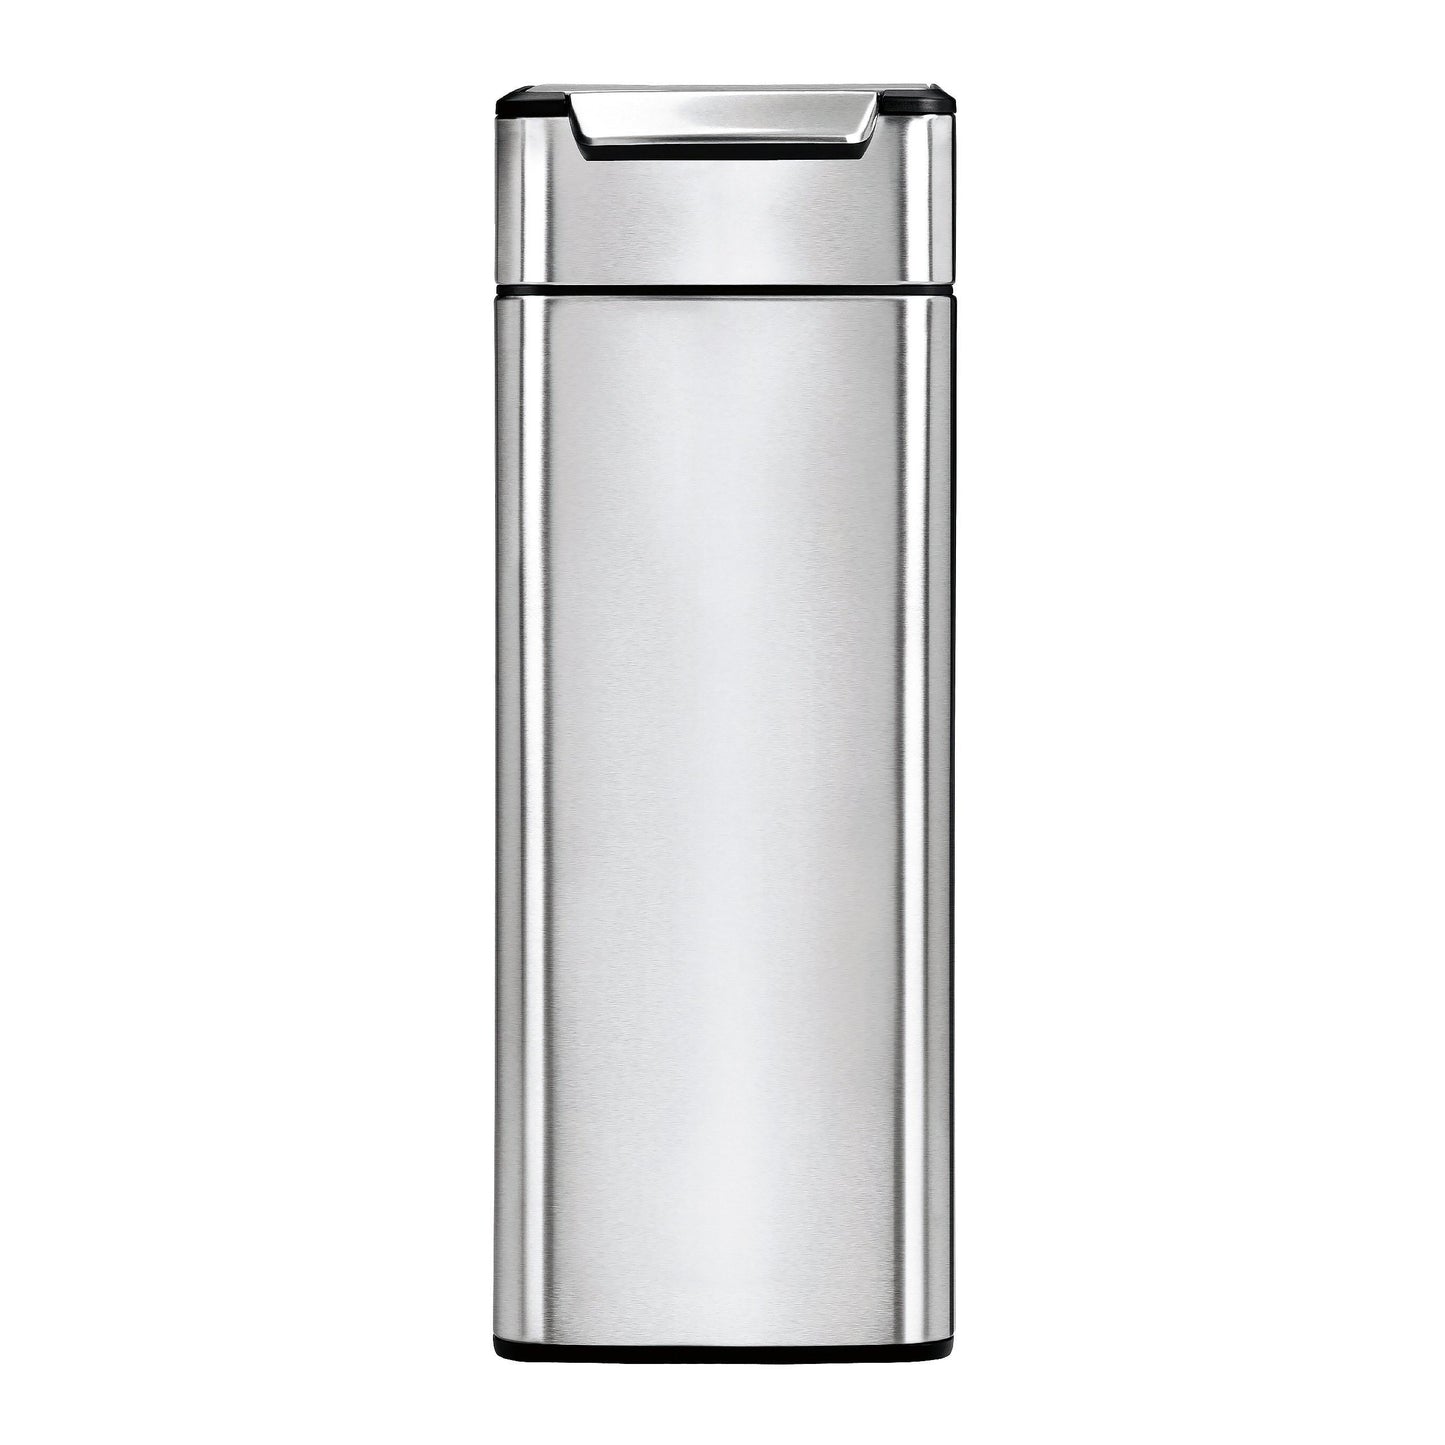 Featured simplehuman 40 liter 10 6 gallon stainless steel slim touch bar kitchen trash can brushed stainless steel